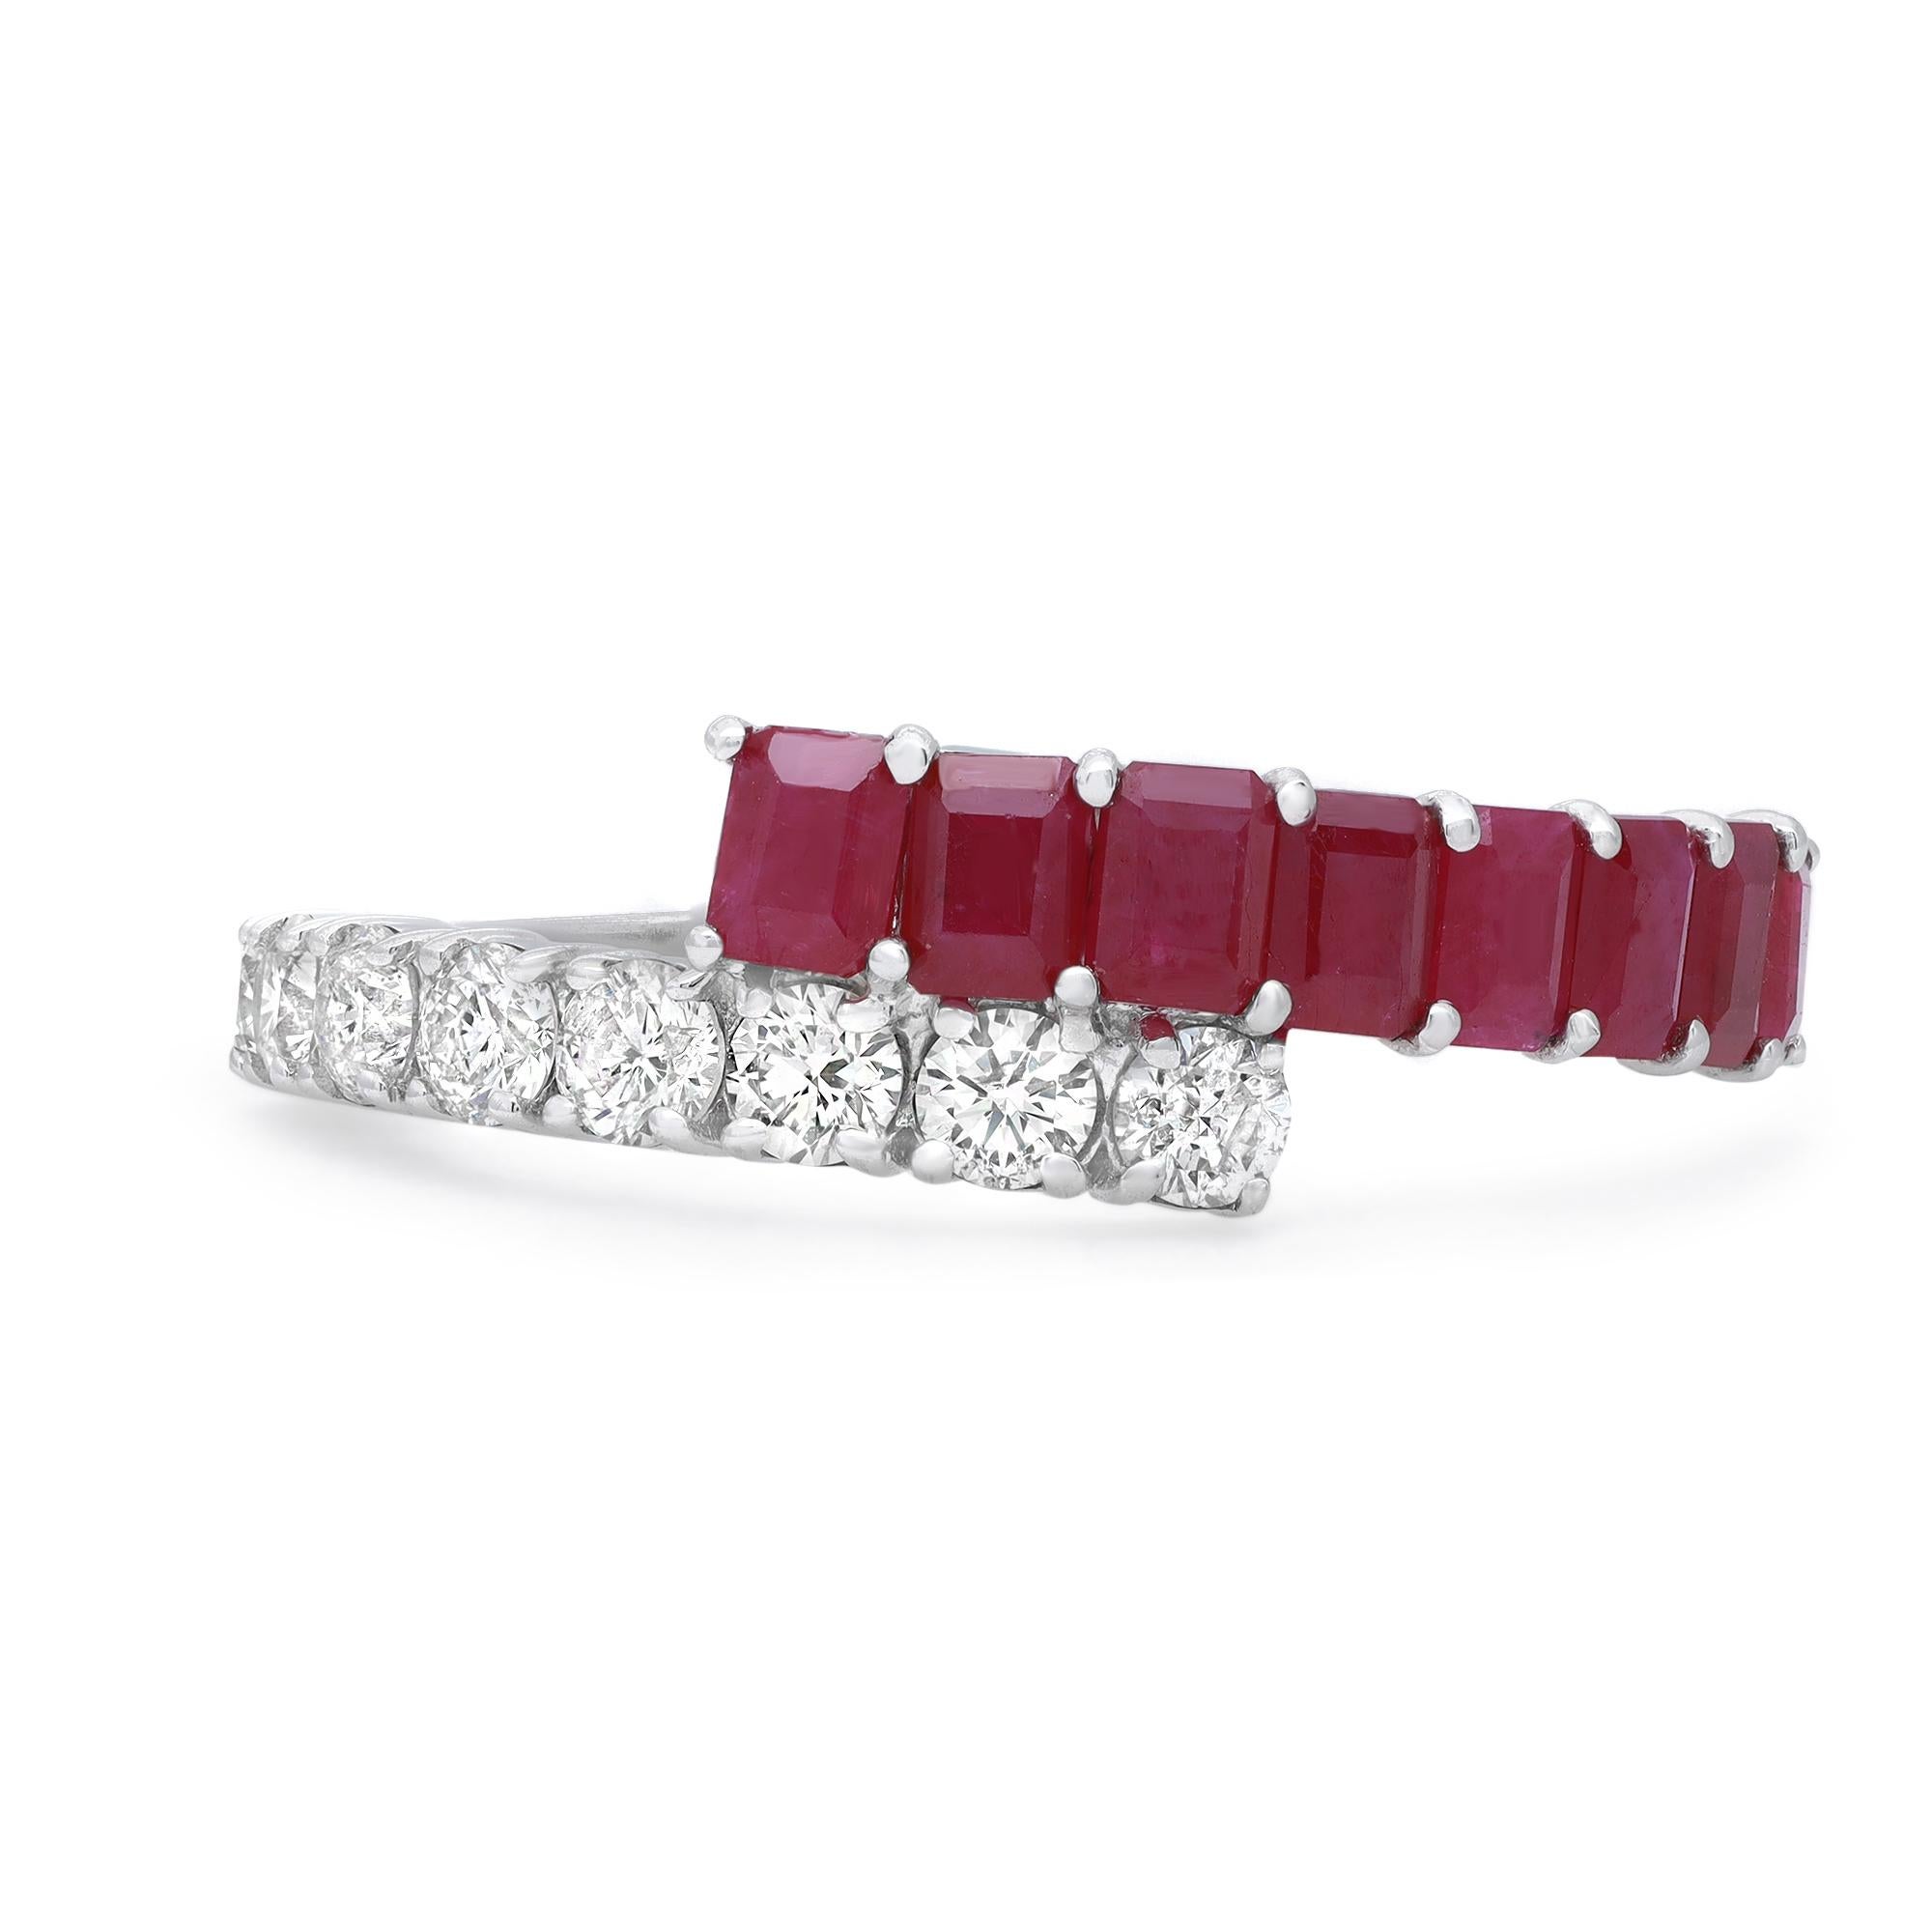 Simple and elegant, ruby and diamond ladies ring. Crafted in high polished 14k white gold. It features two half rows of prong set 8 round brilliant cut diamonds and 8 emerald cut rubies for a timeless, eye catchy style. Total diamond weight: 0.61